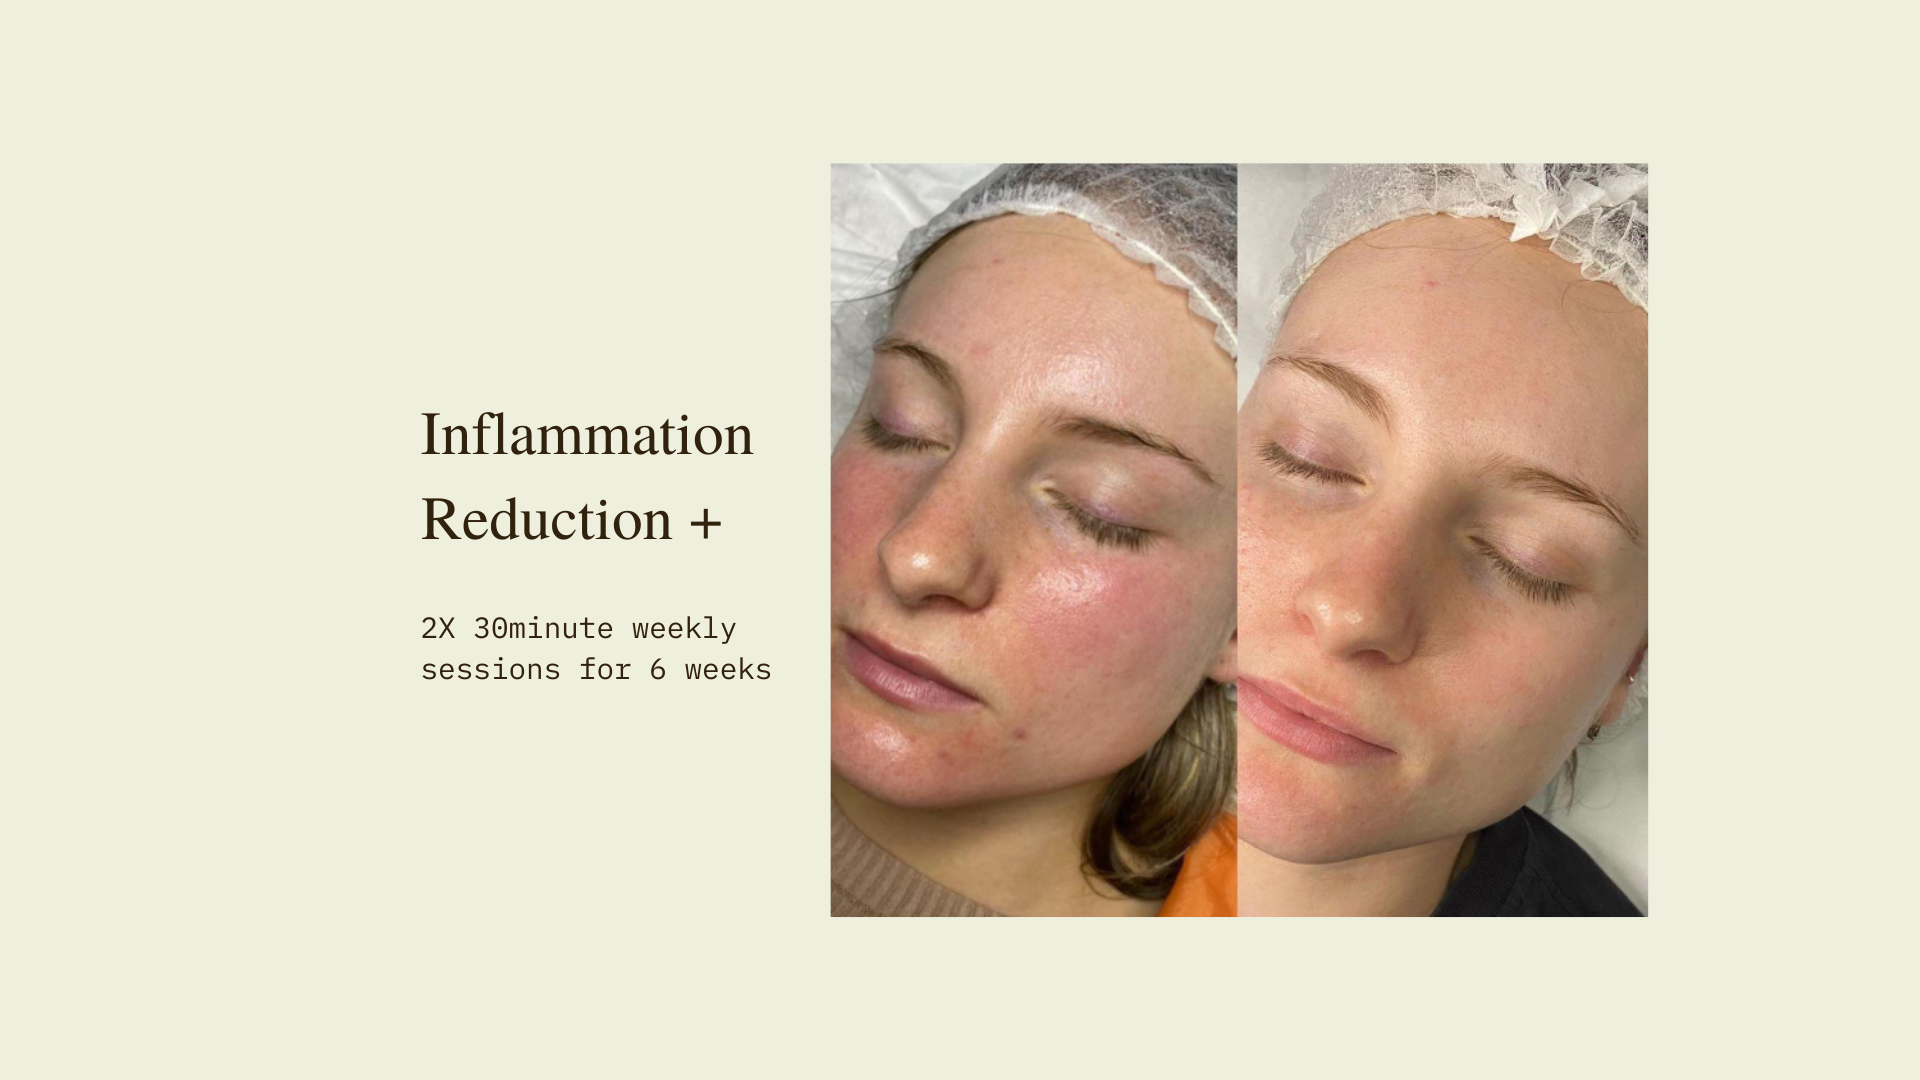 LED facial Therapy Before and After- Inflammation Reduction